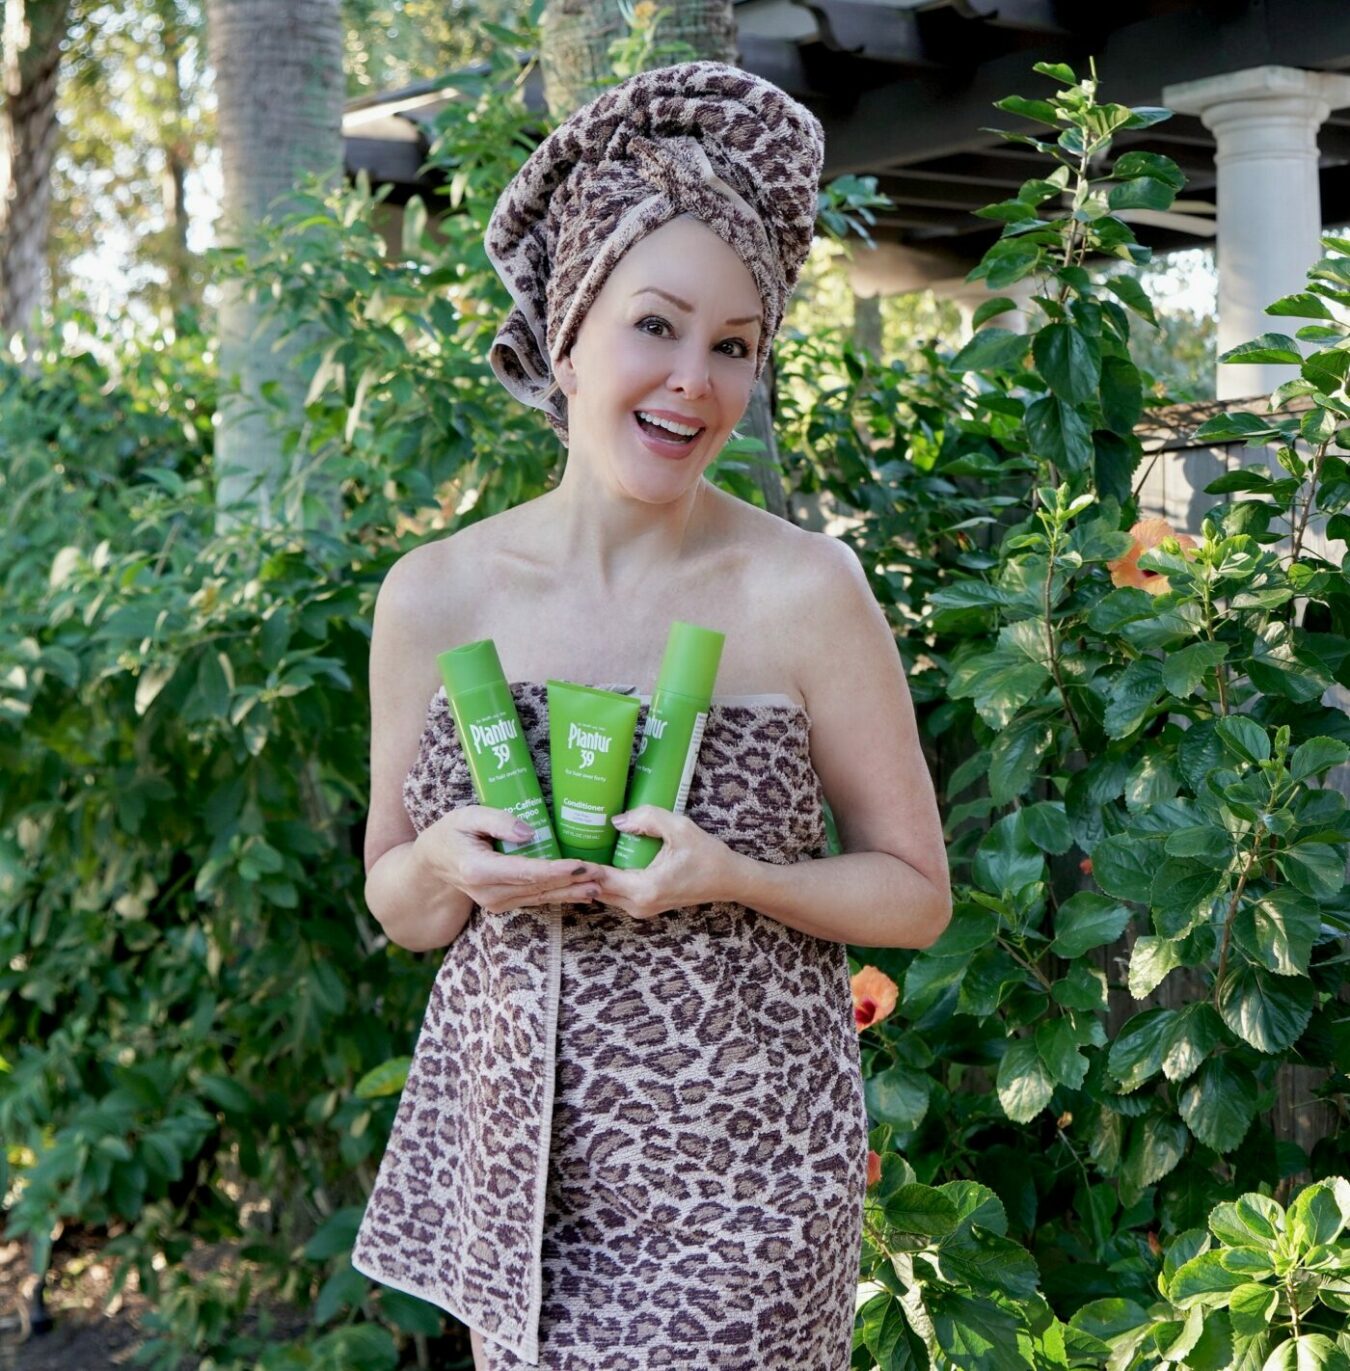 Sheree Frede of the SheShe Show wearing a leopard print towel holding Plantur 39 products